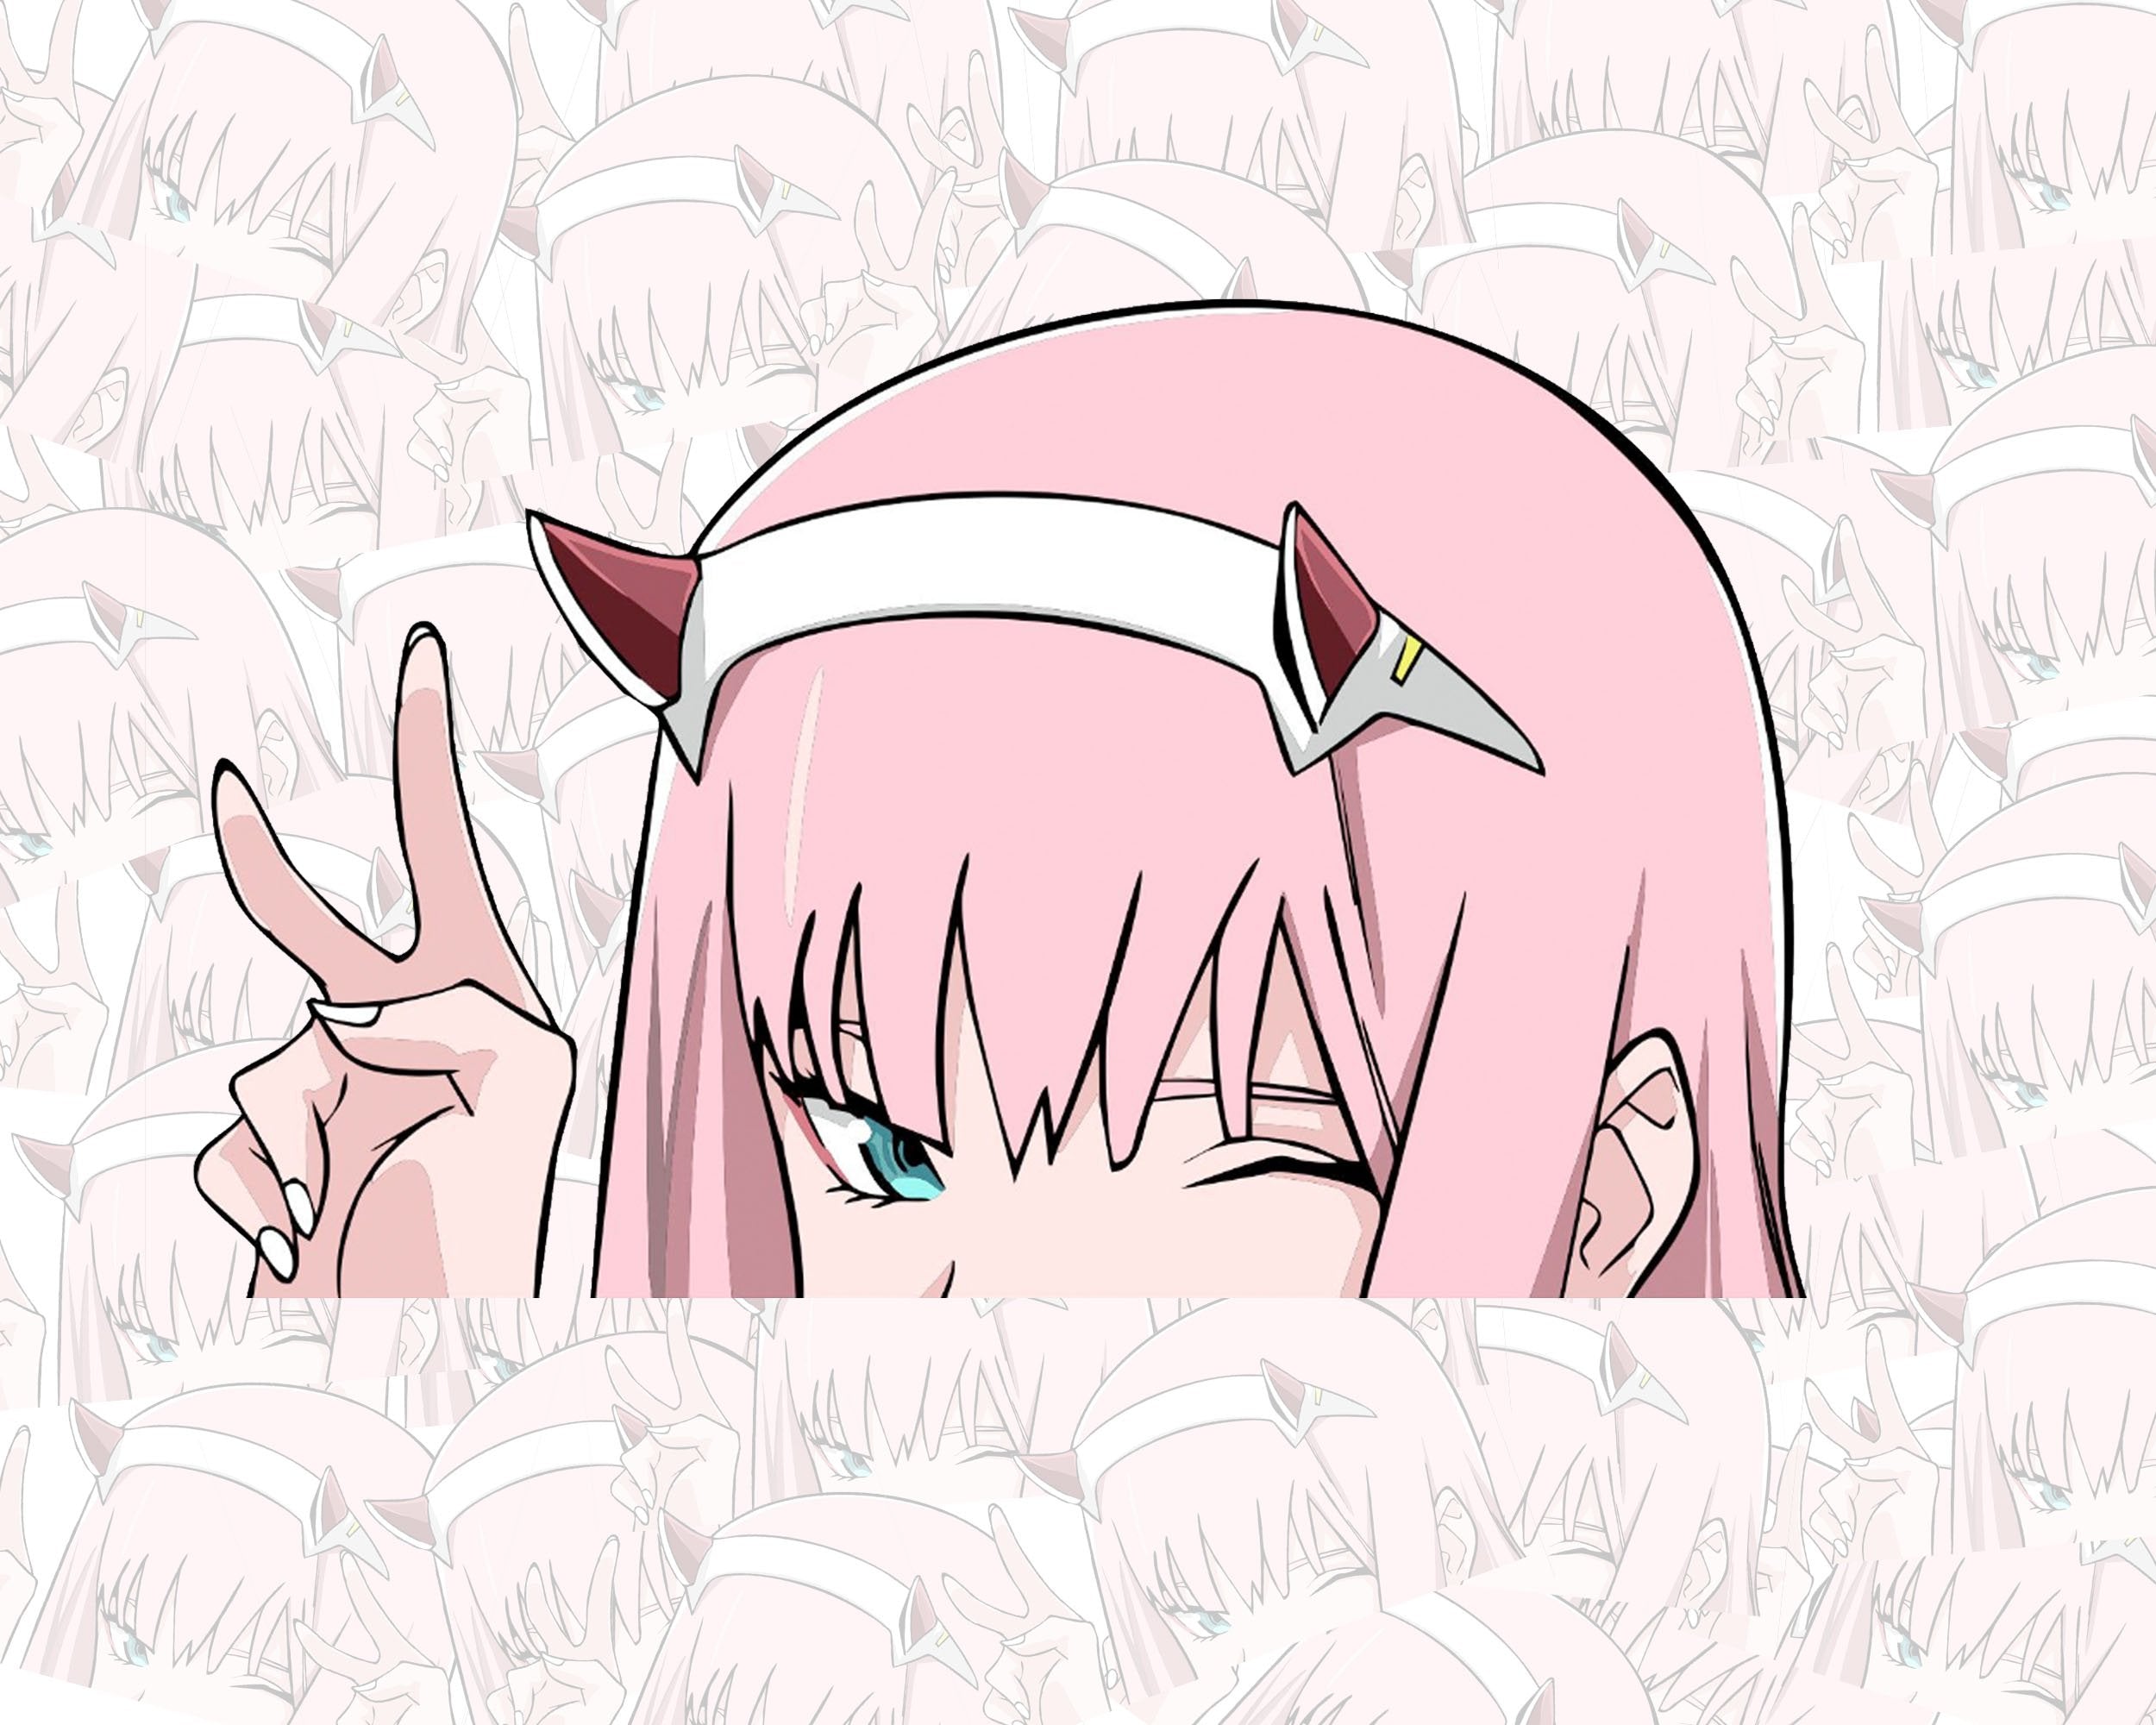 Anime Peeker Stickers | Buy Well-desinged Anime Peeker Stickers at A Cheap  Price Here.